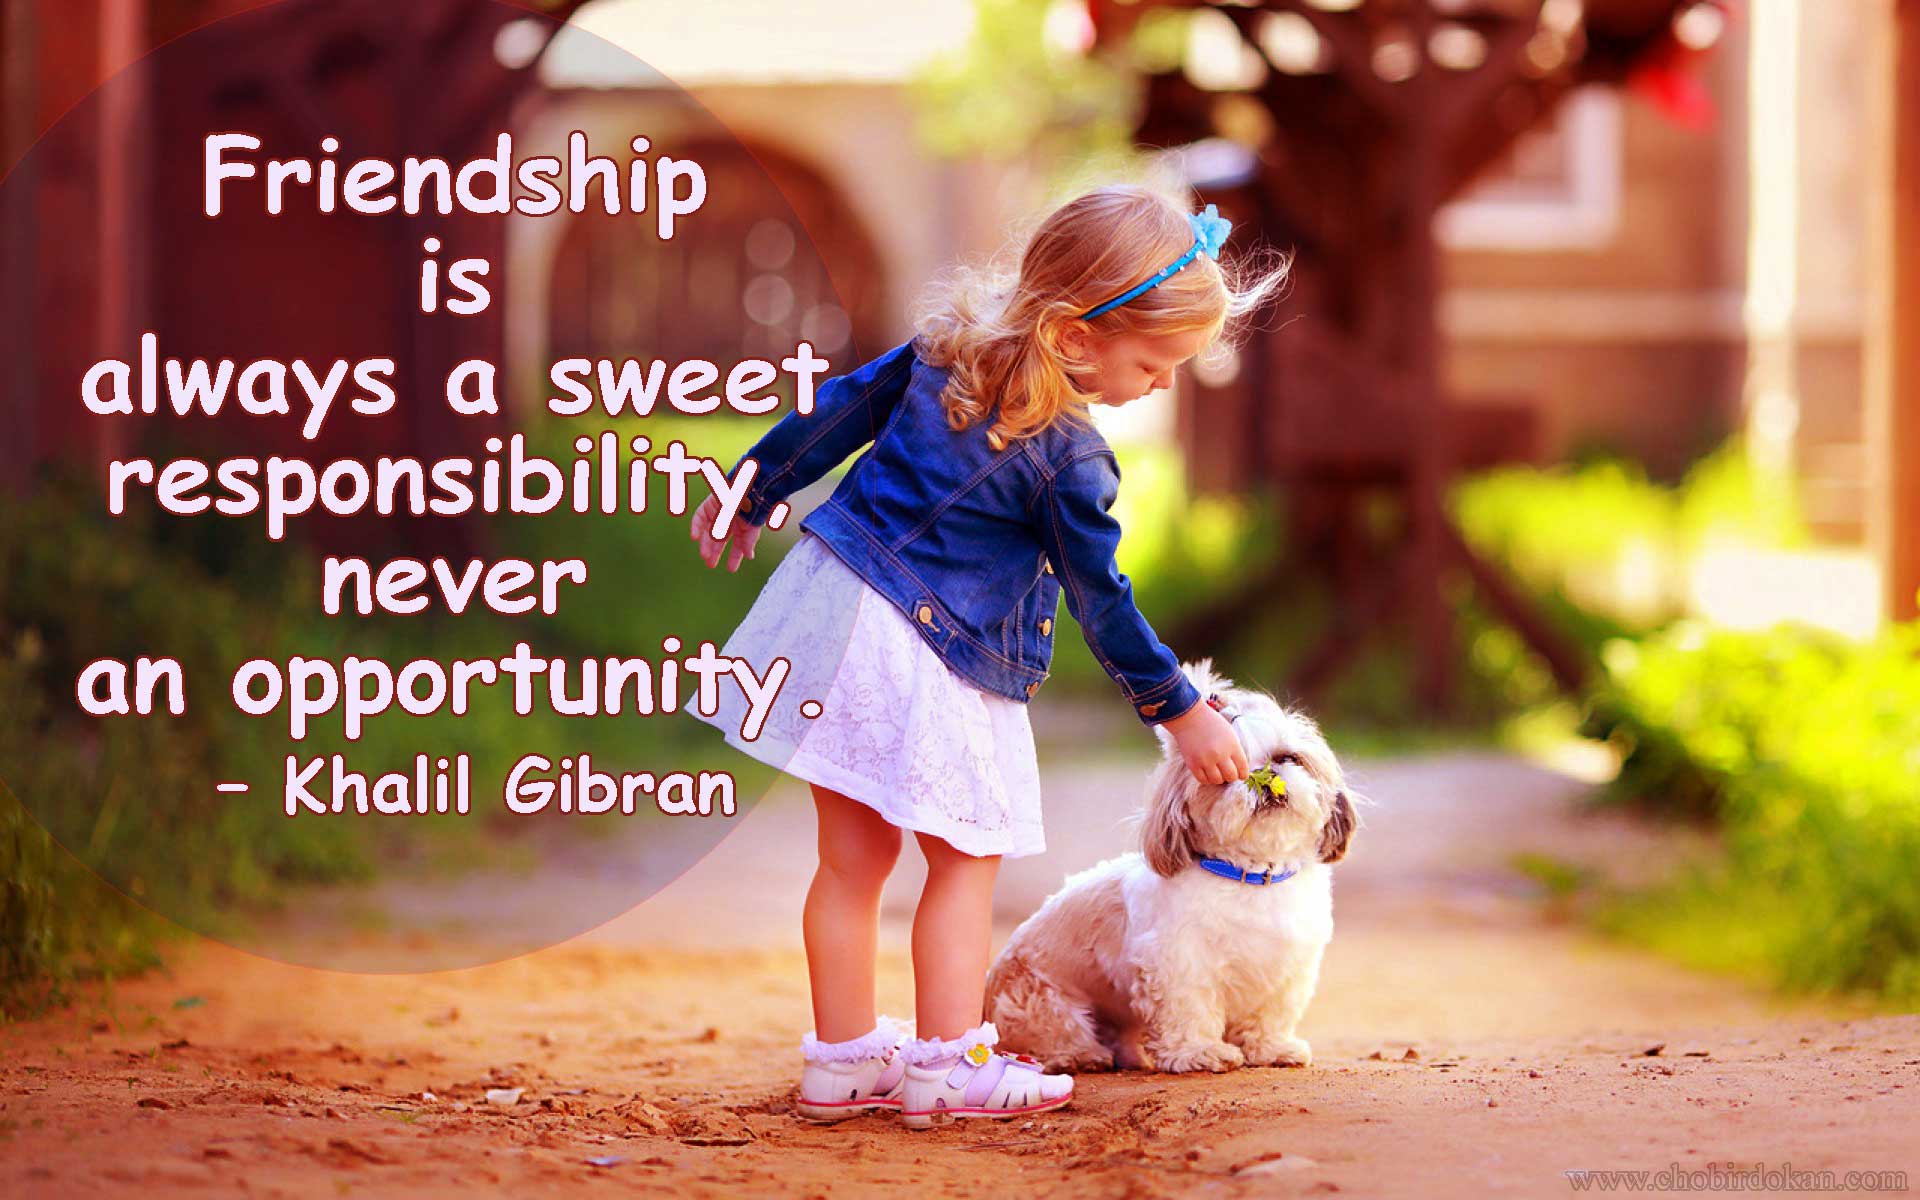 40 Cute Friendship Quotes With Images Friendship wallpapers